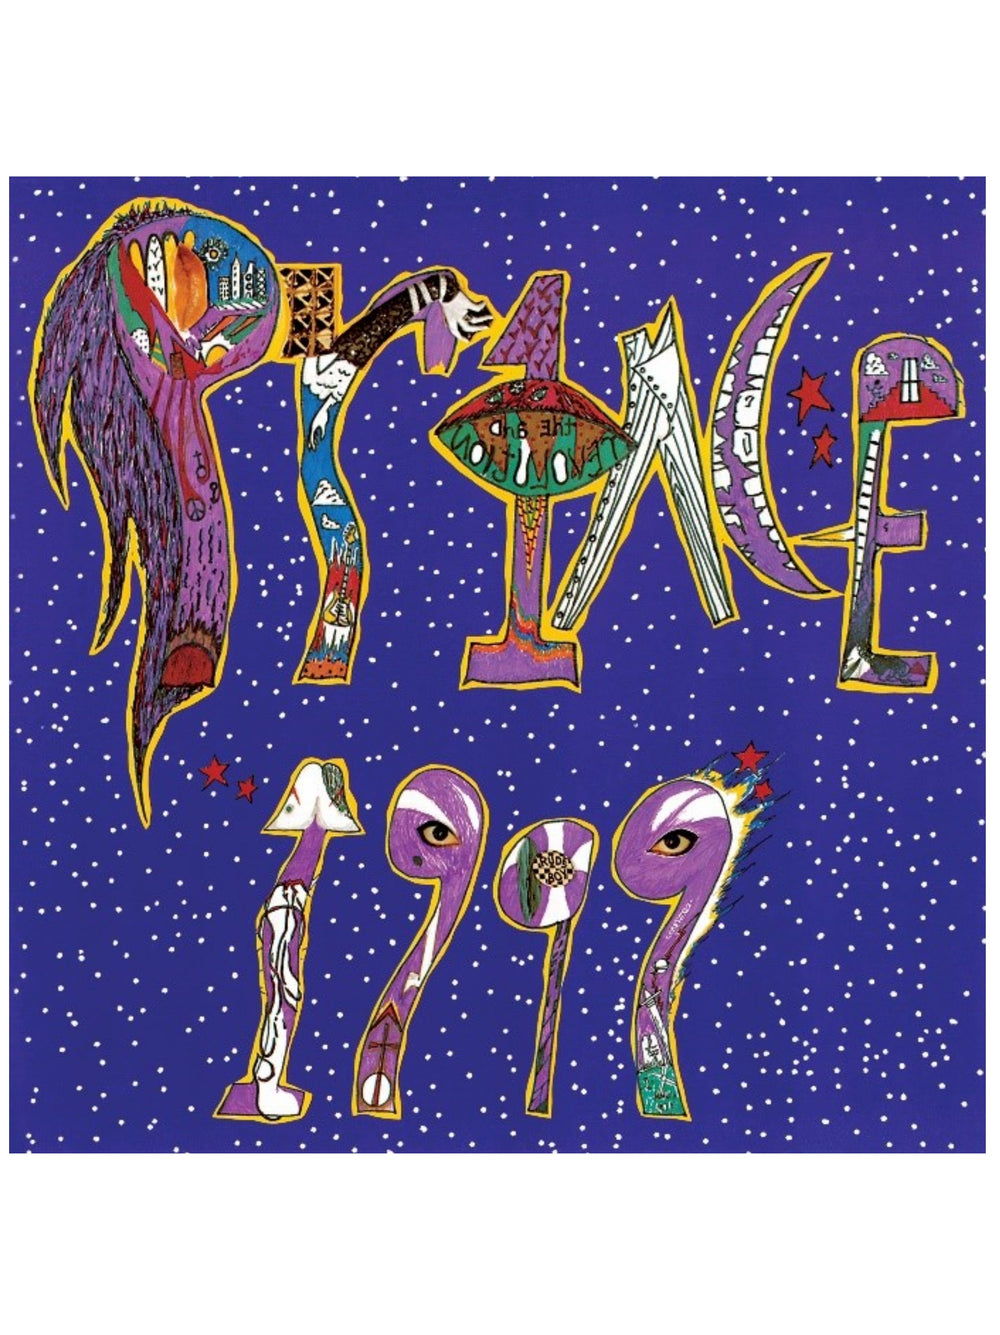 Prince – 1999 Deluxe Edition 4LP 180g Warner 2019 Release SEALED AS NEW